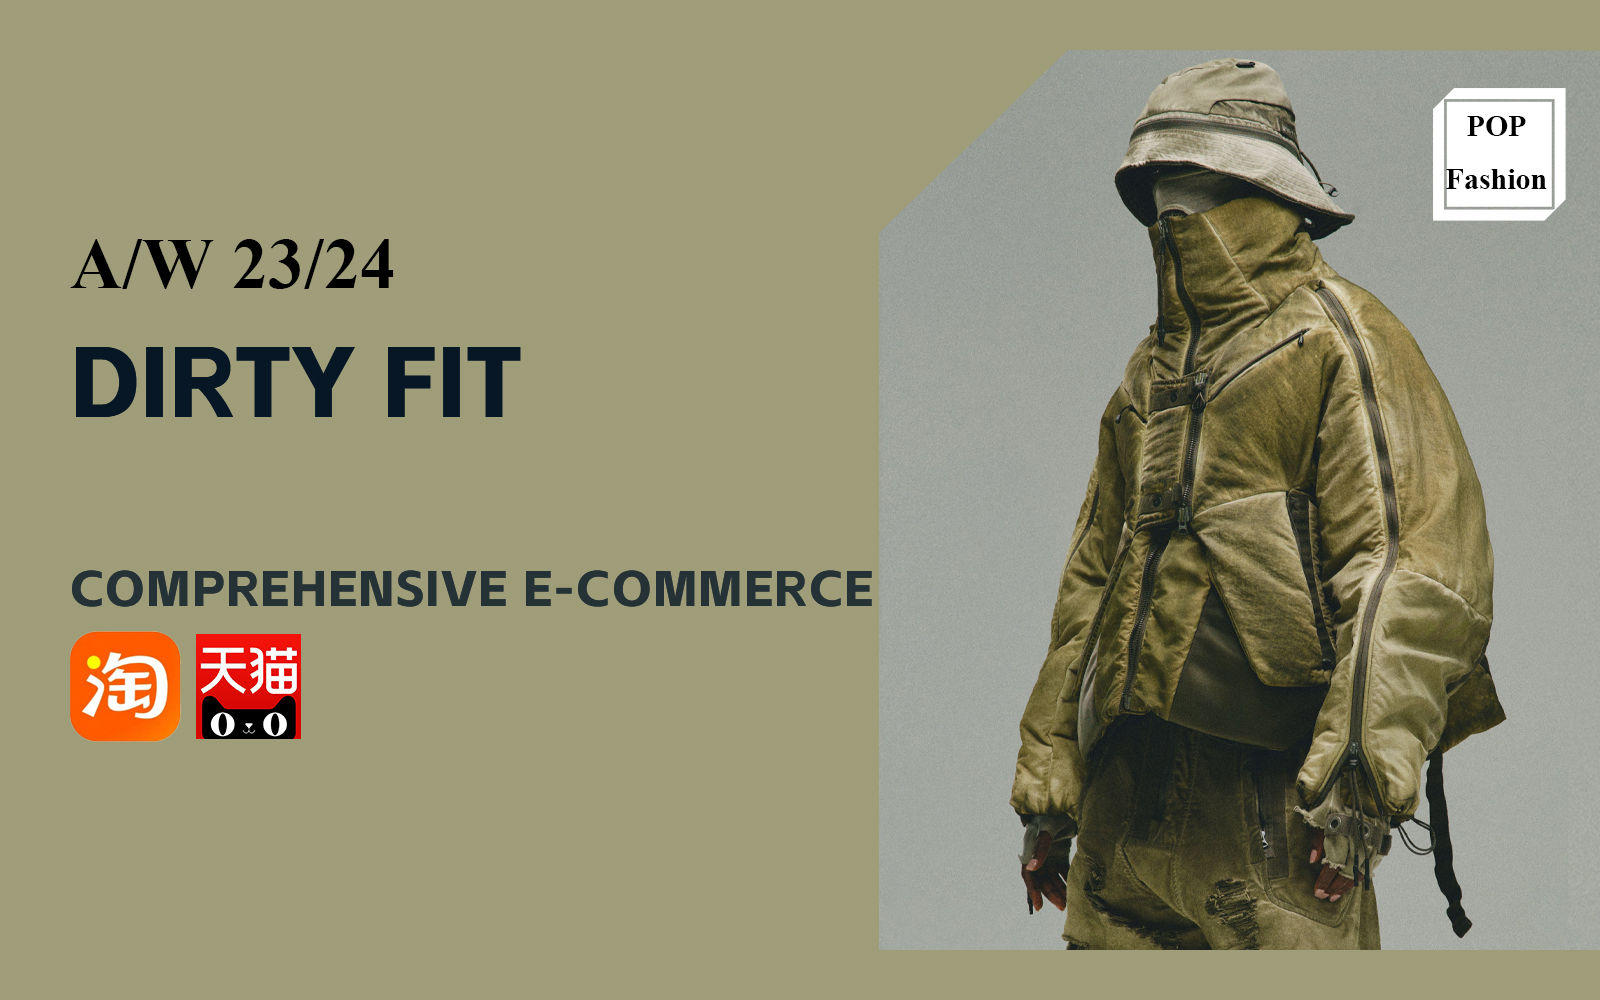 Dirty Fit -- The Comprehensive Analysis of Menswear E-Commerce Brand